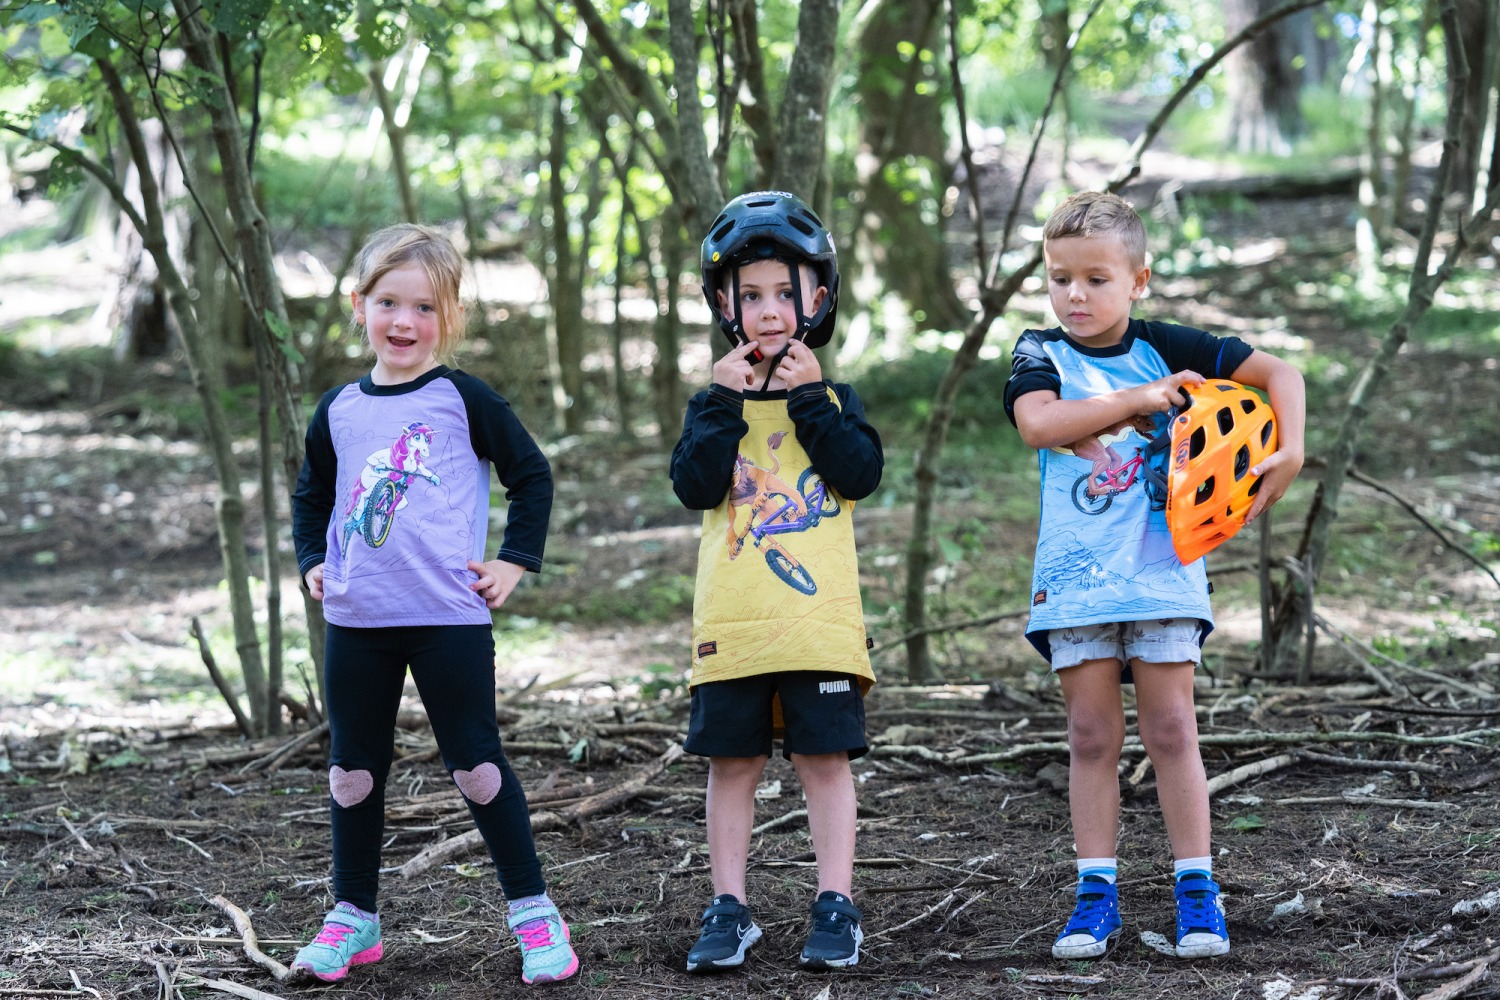 Shotgun release new kids jerseys for aged 2 to 6 years old